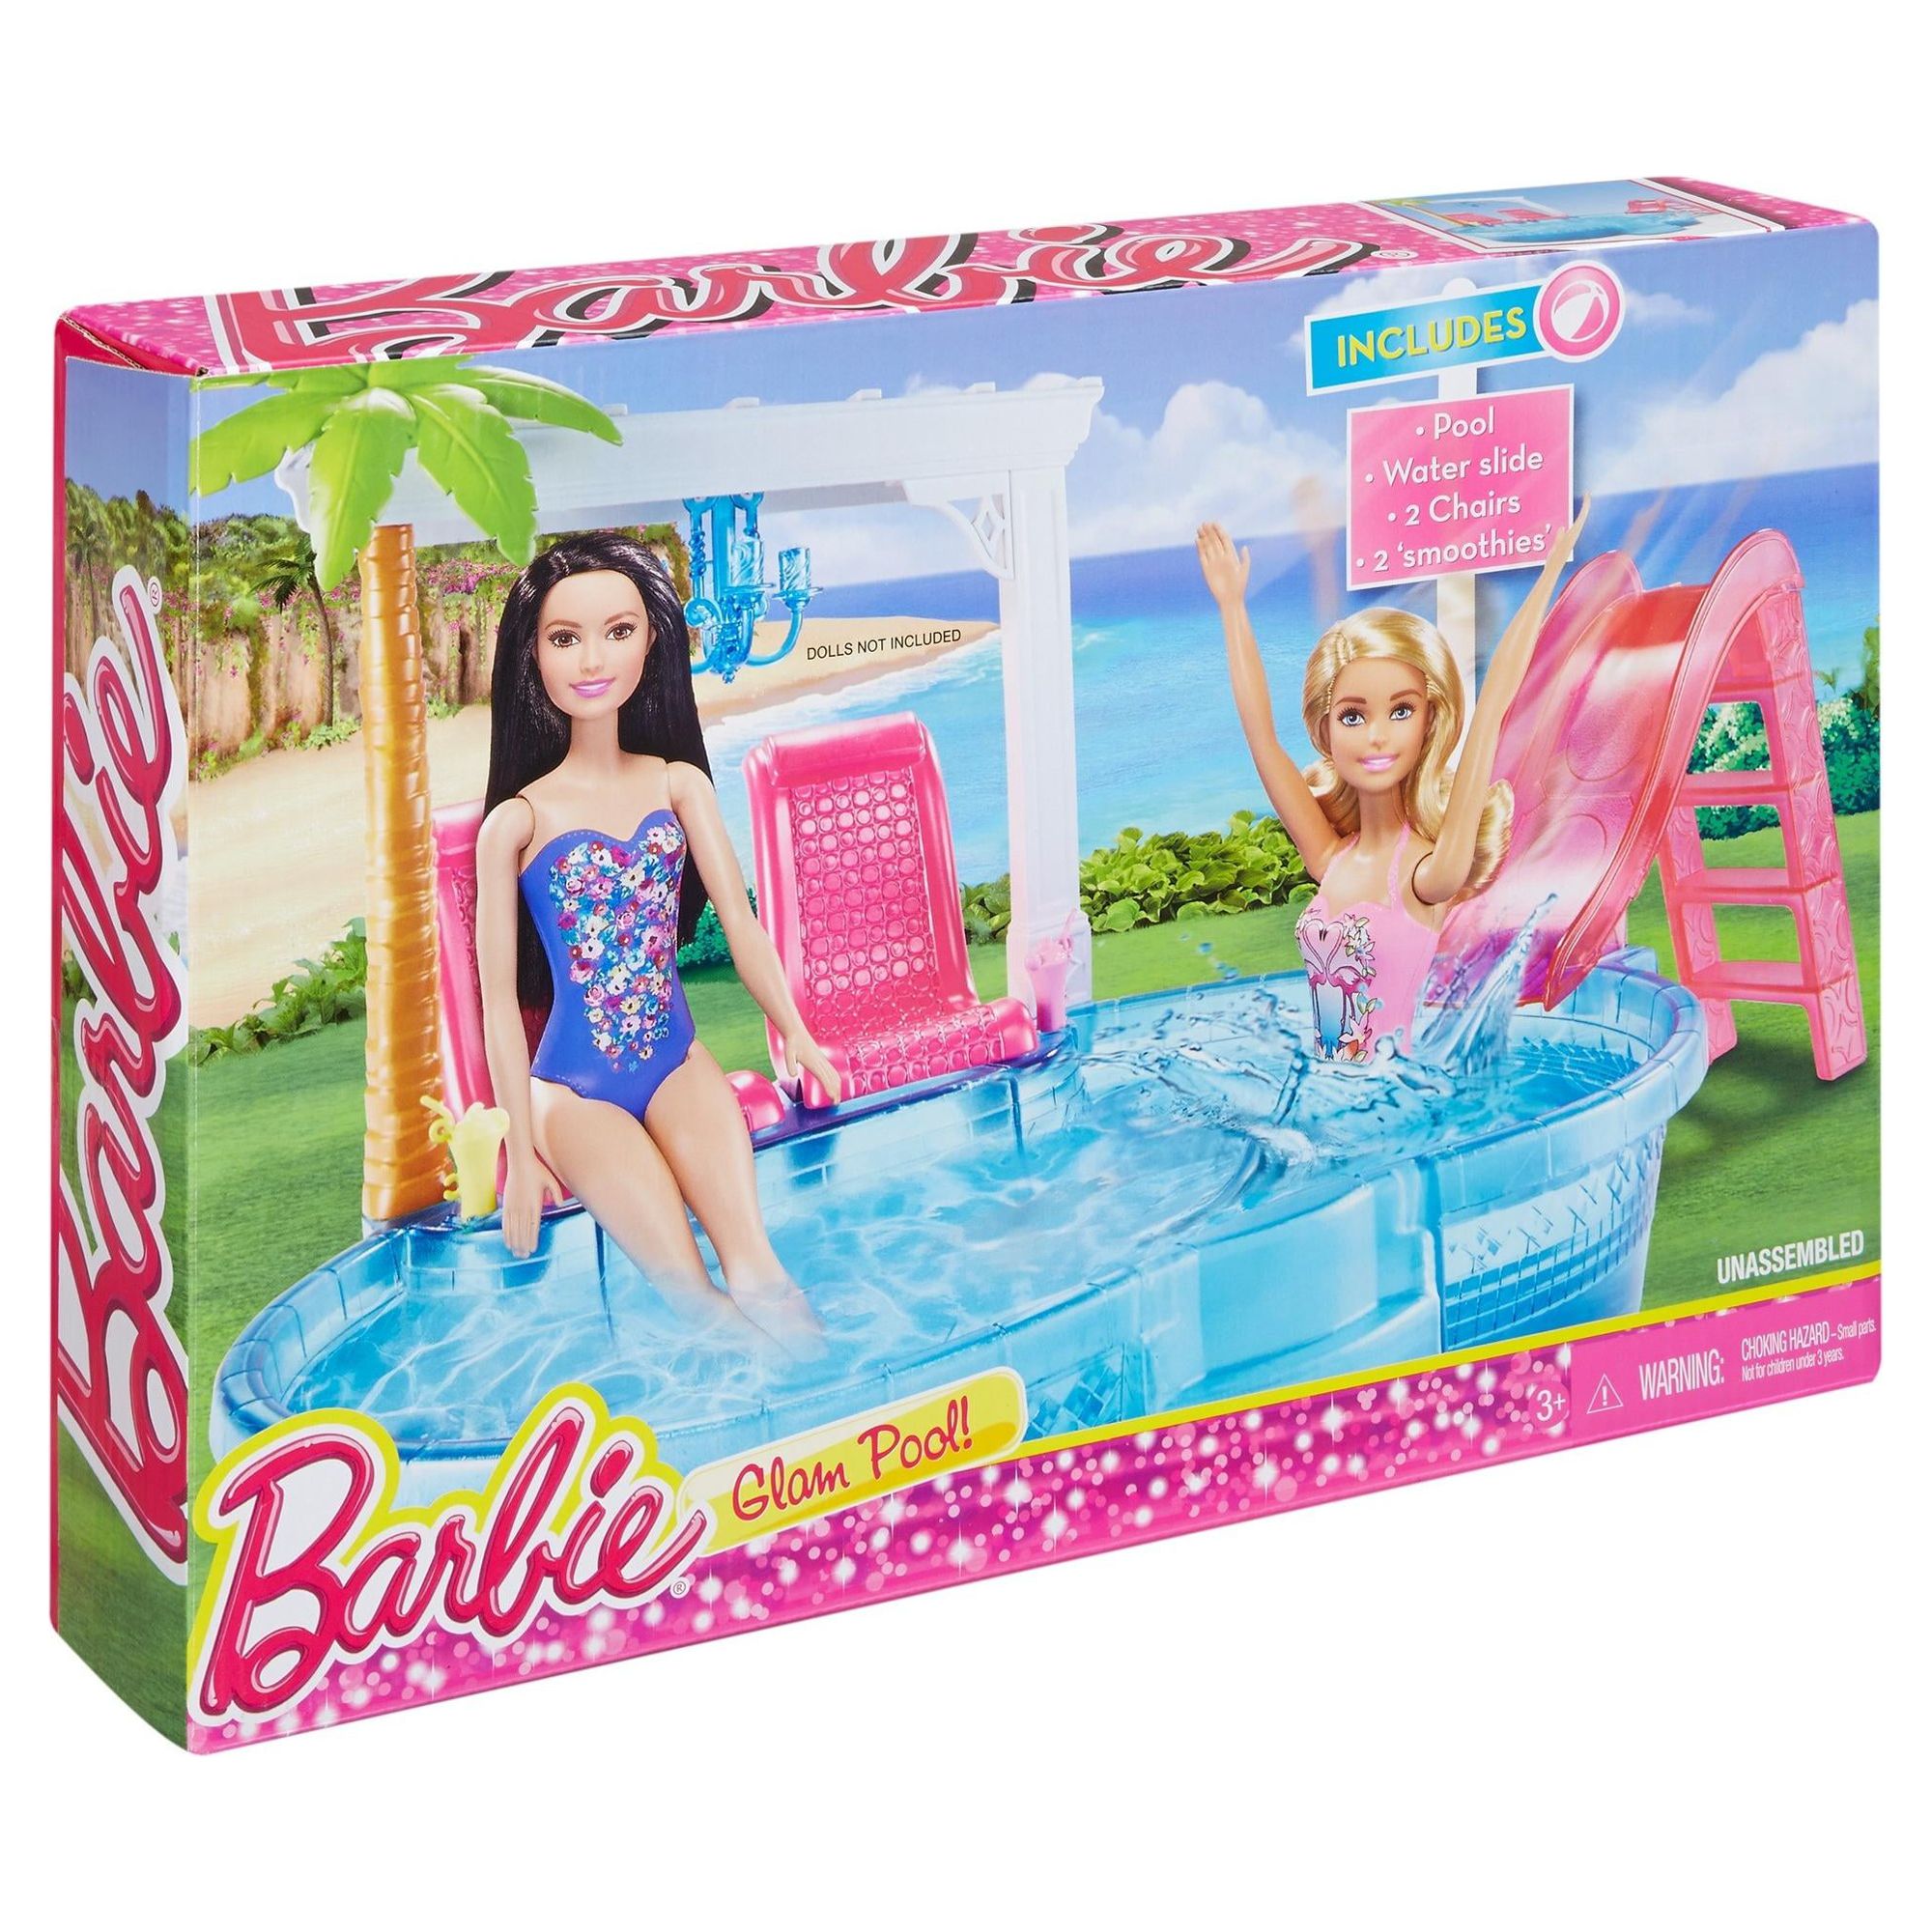 Barbie Glam Pool Party Playset with Themed-Accessories - image 5 of 5